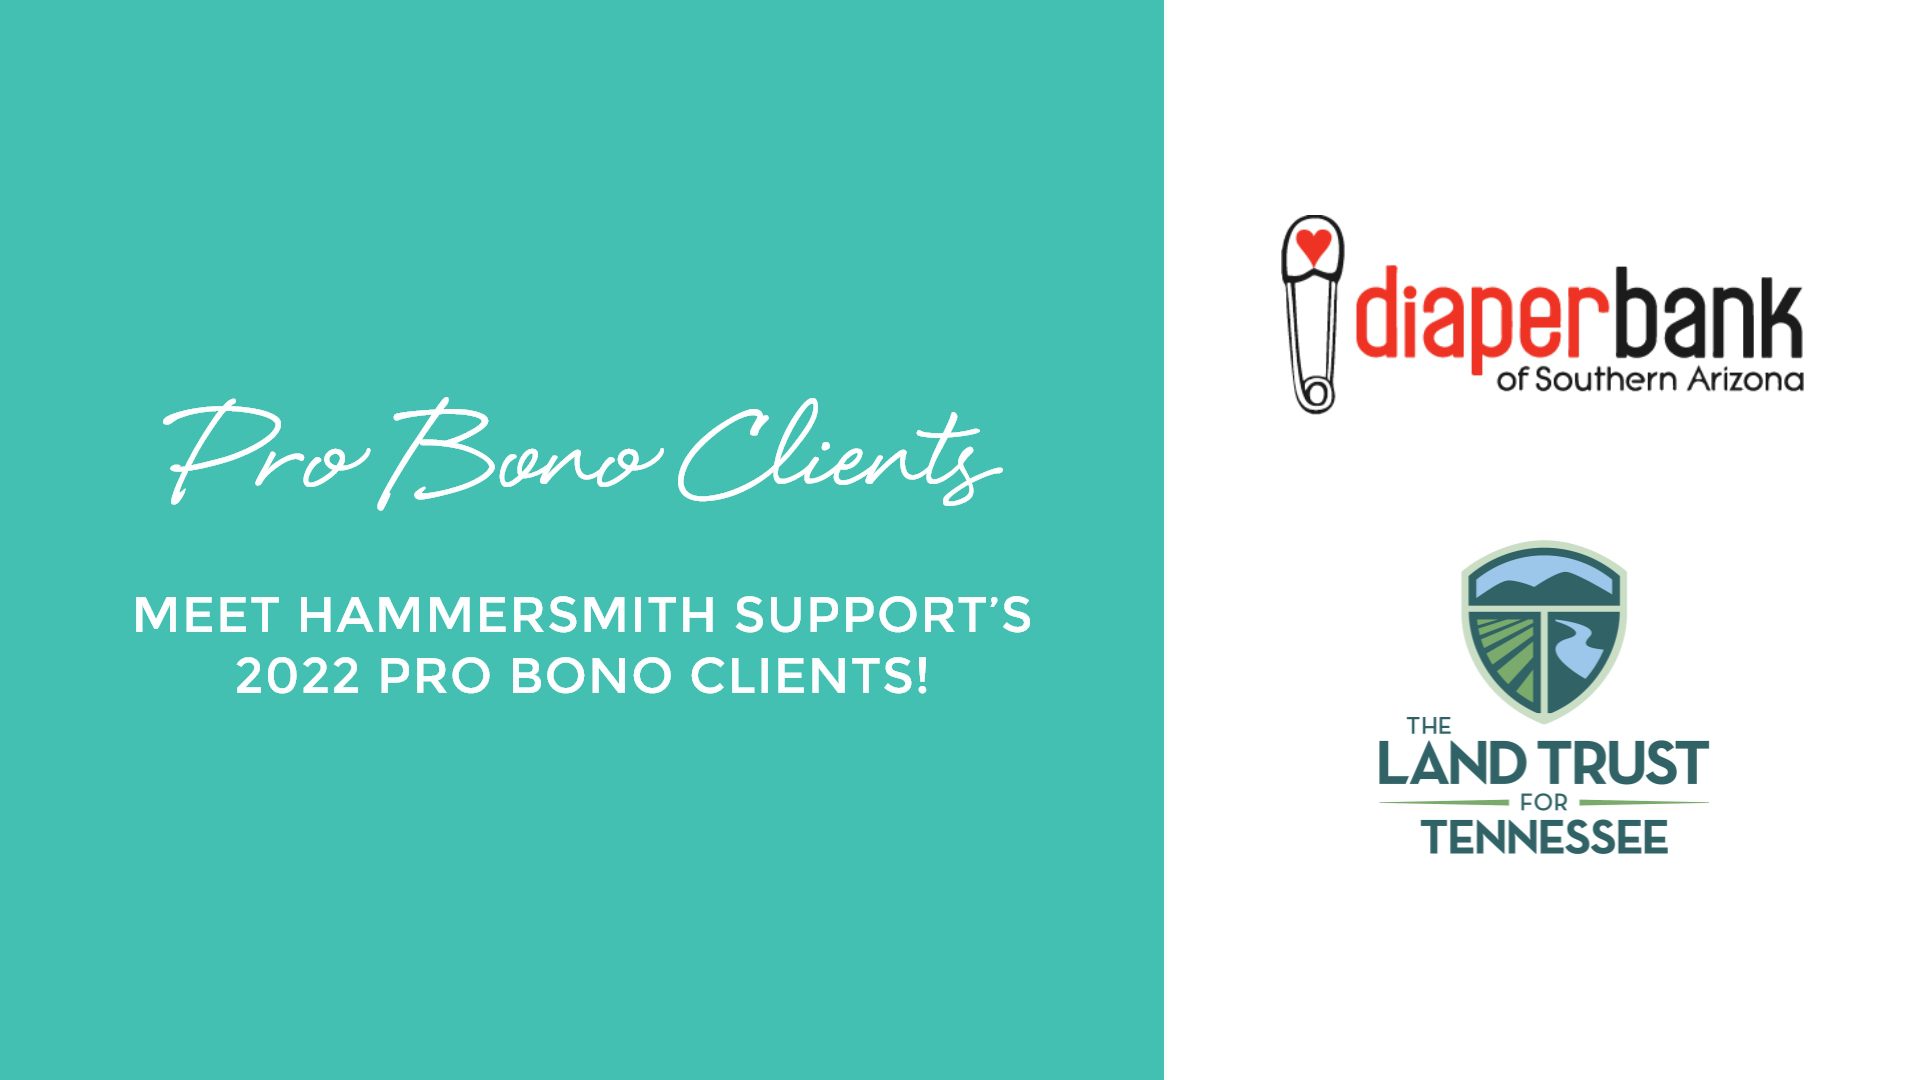 Meet Hammersmith Support's 2022 Pro Bono Clients!